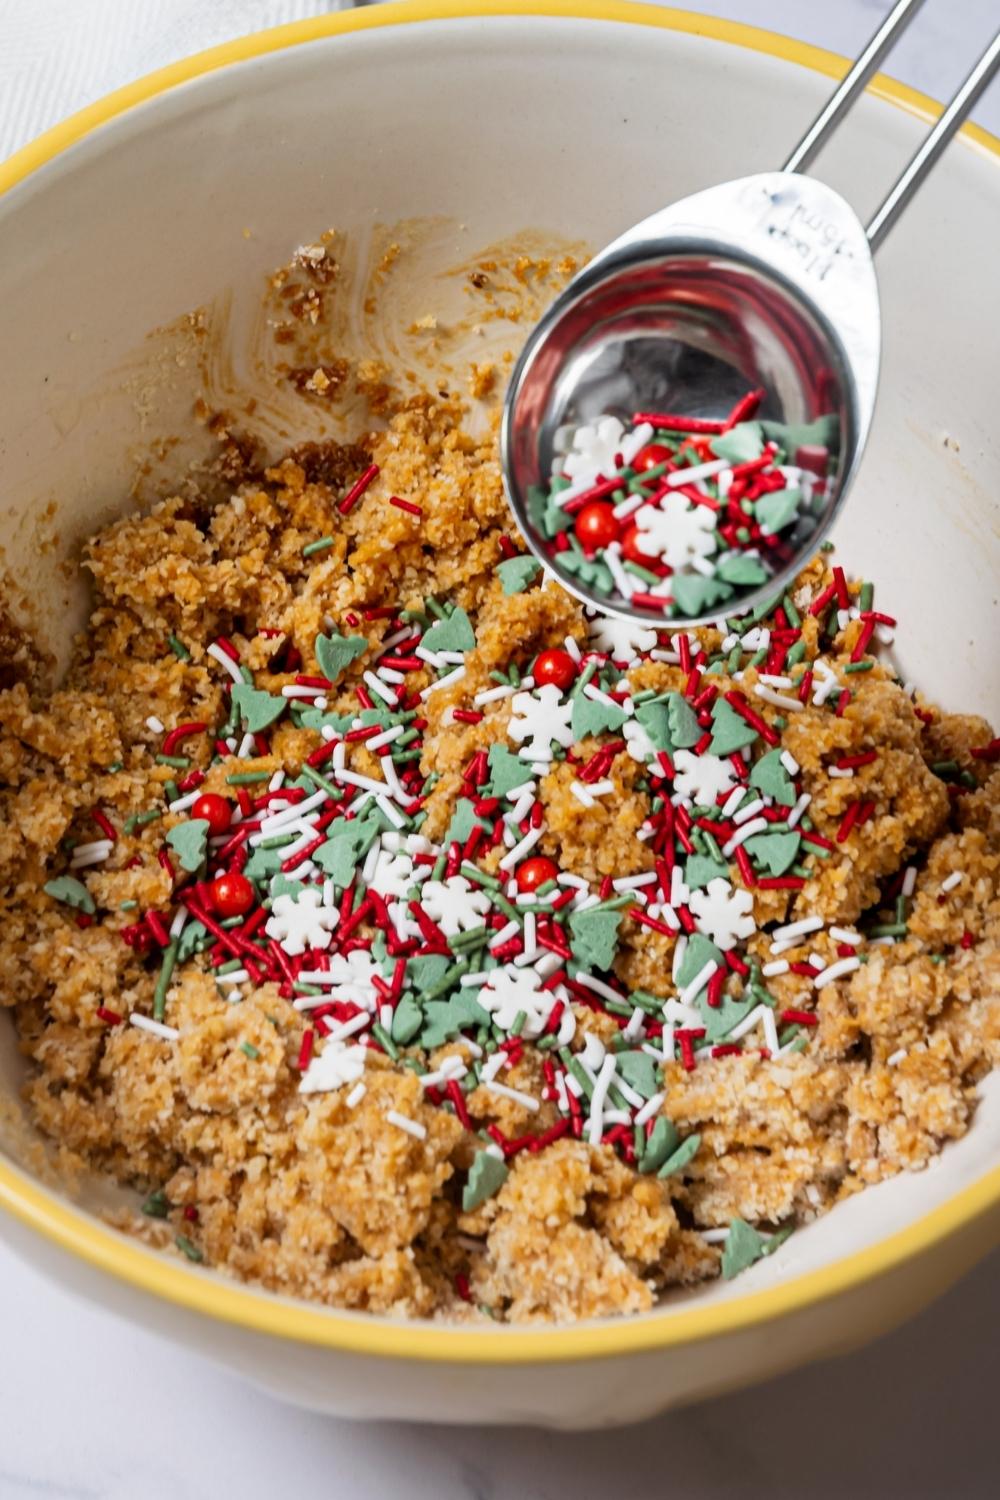 A measuring cup with christmas sprinkles being held over a bowl with the sprinkles on top of a no bake peanut butter cookie dough.